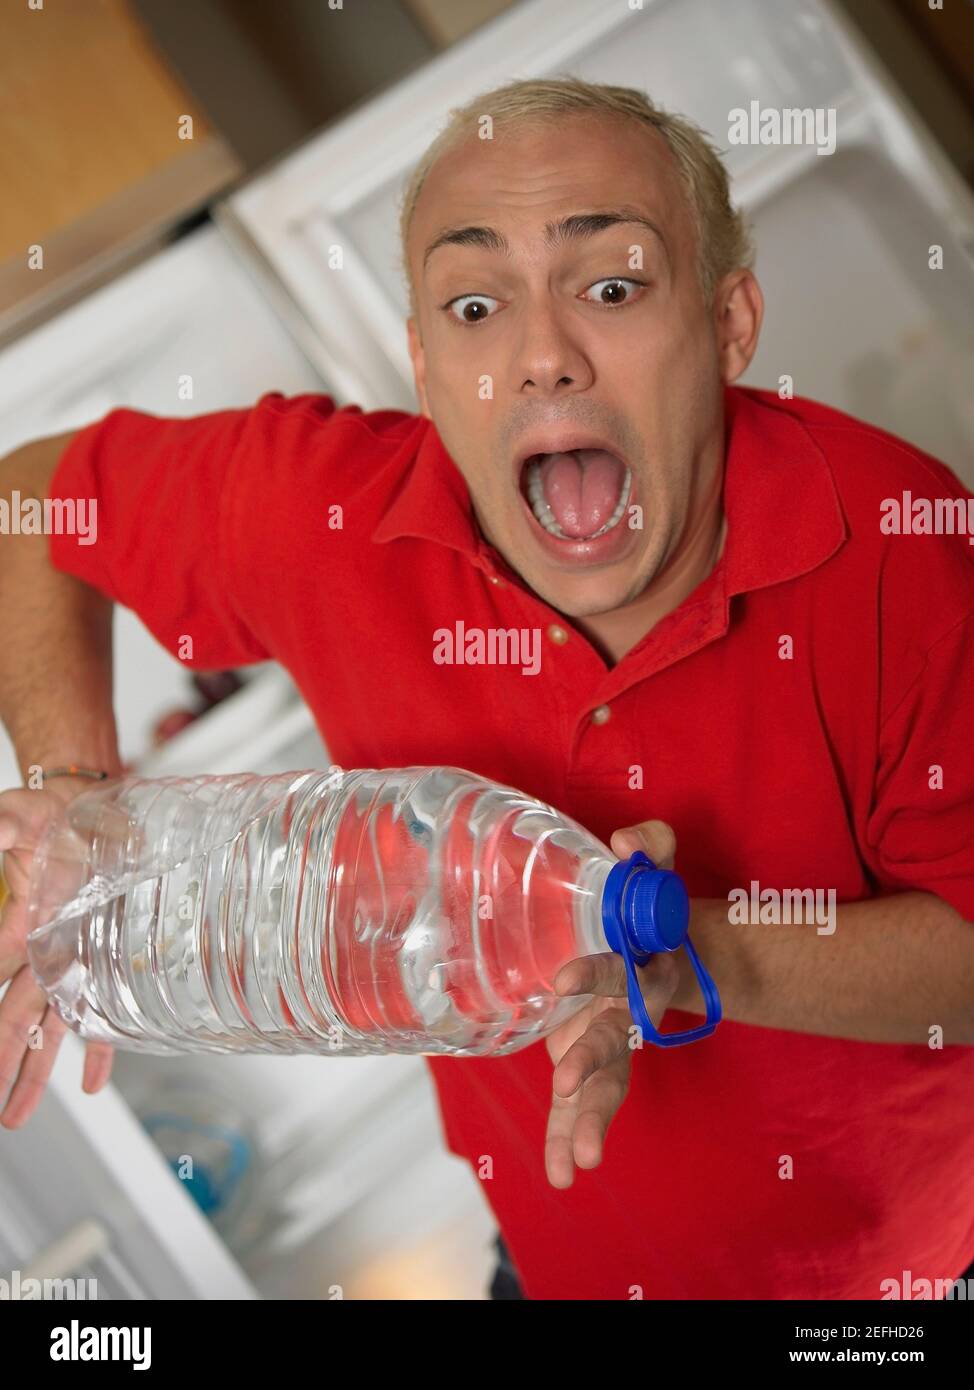 Young man looking at a water bottle slipping from his hands Stock Photo